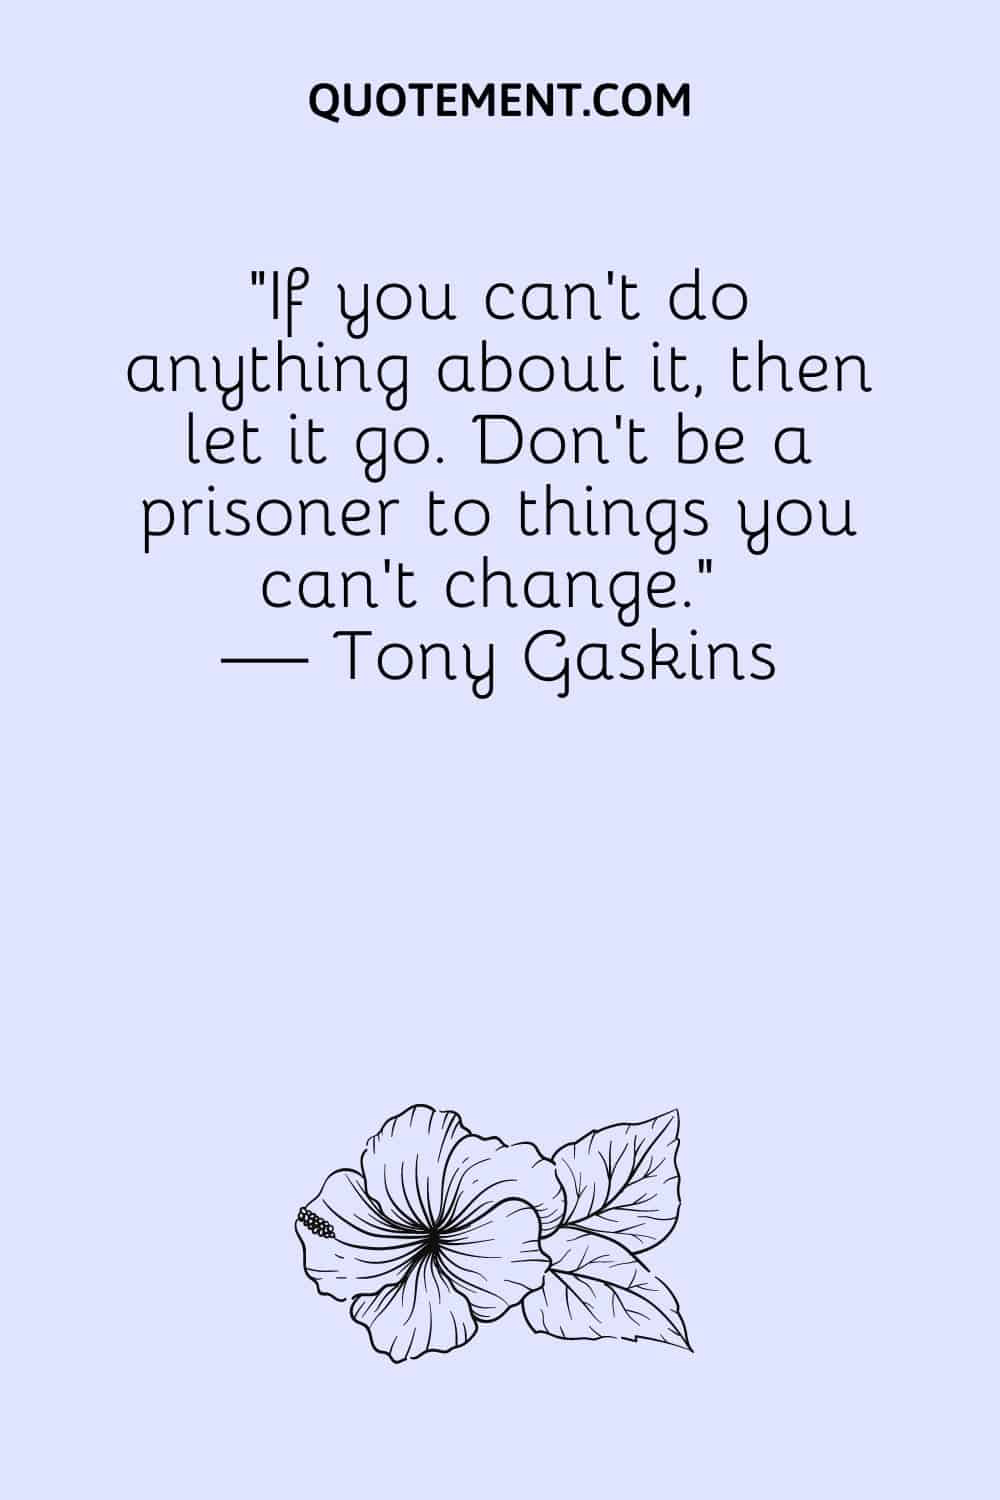 If you can’t do anything about it, then let it go